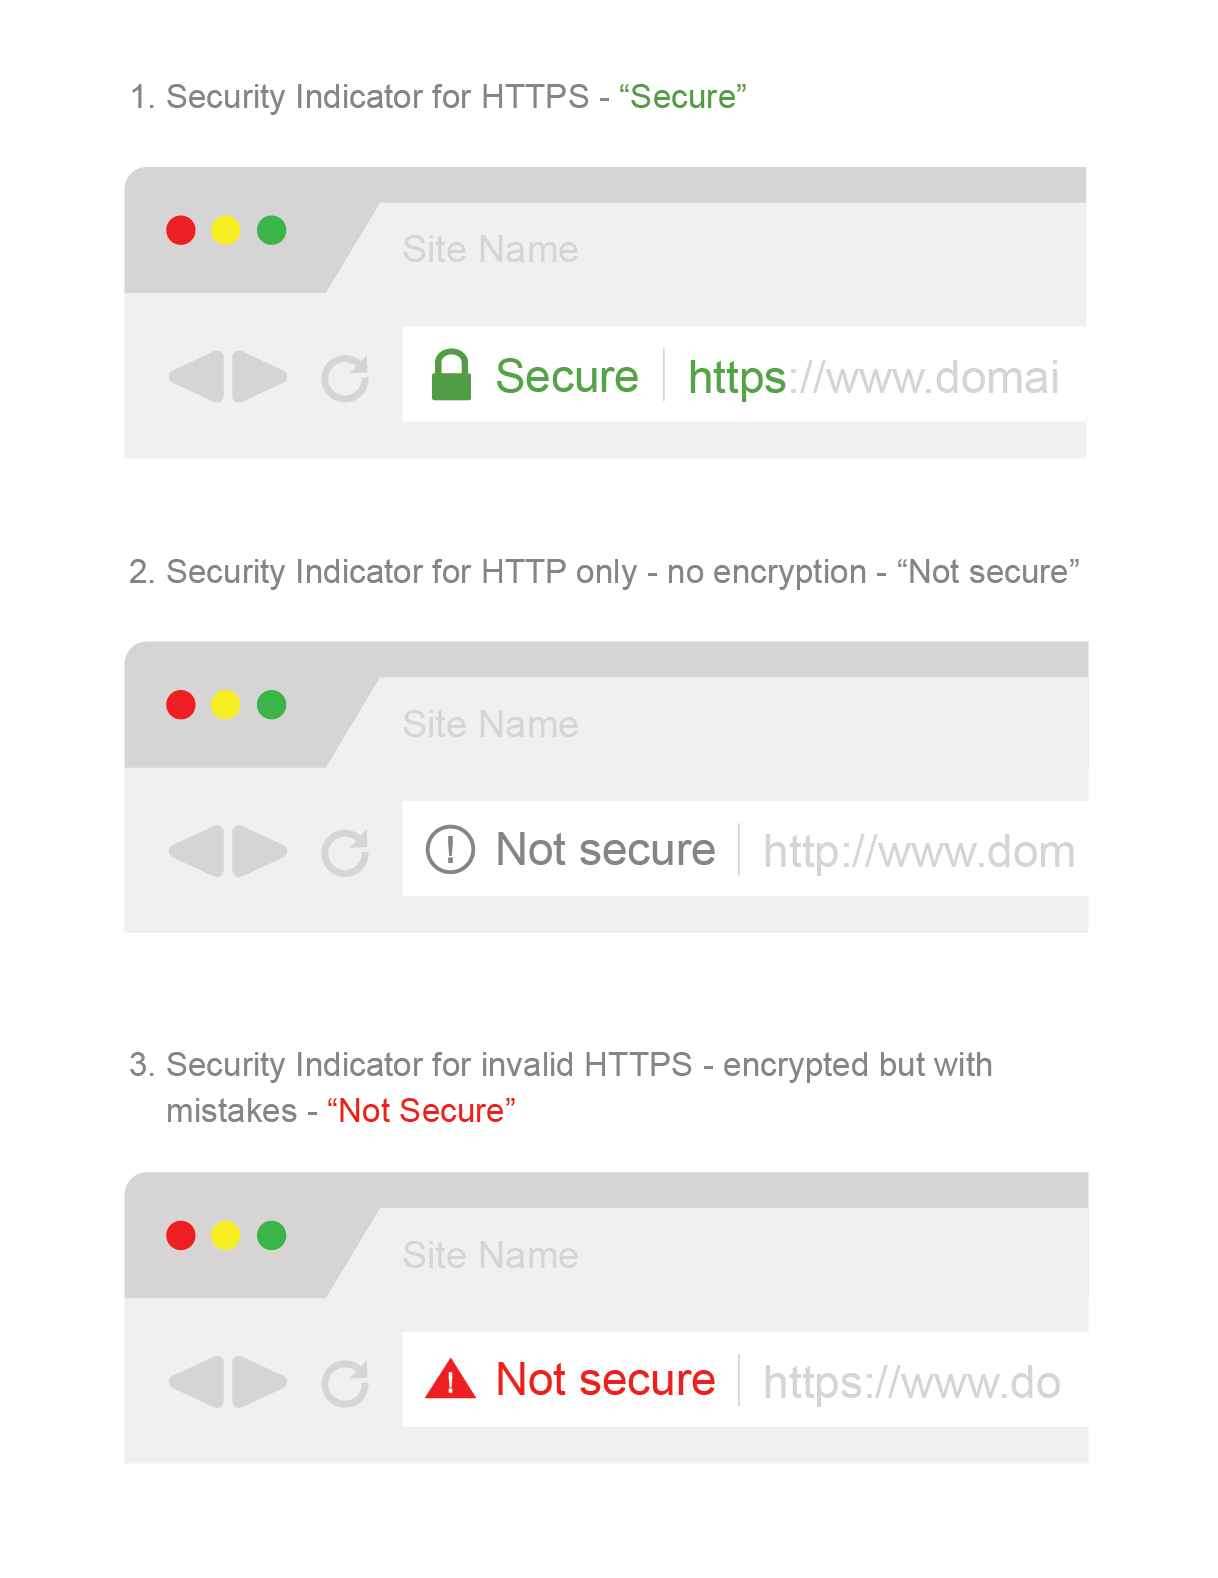 Web browsers' UI for HTTPS